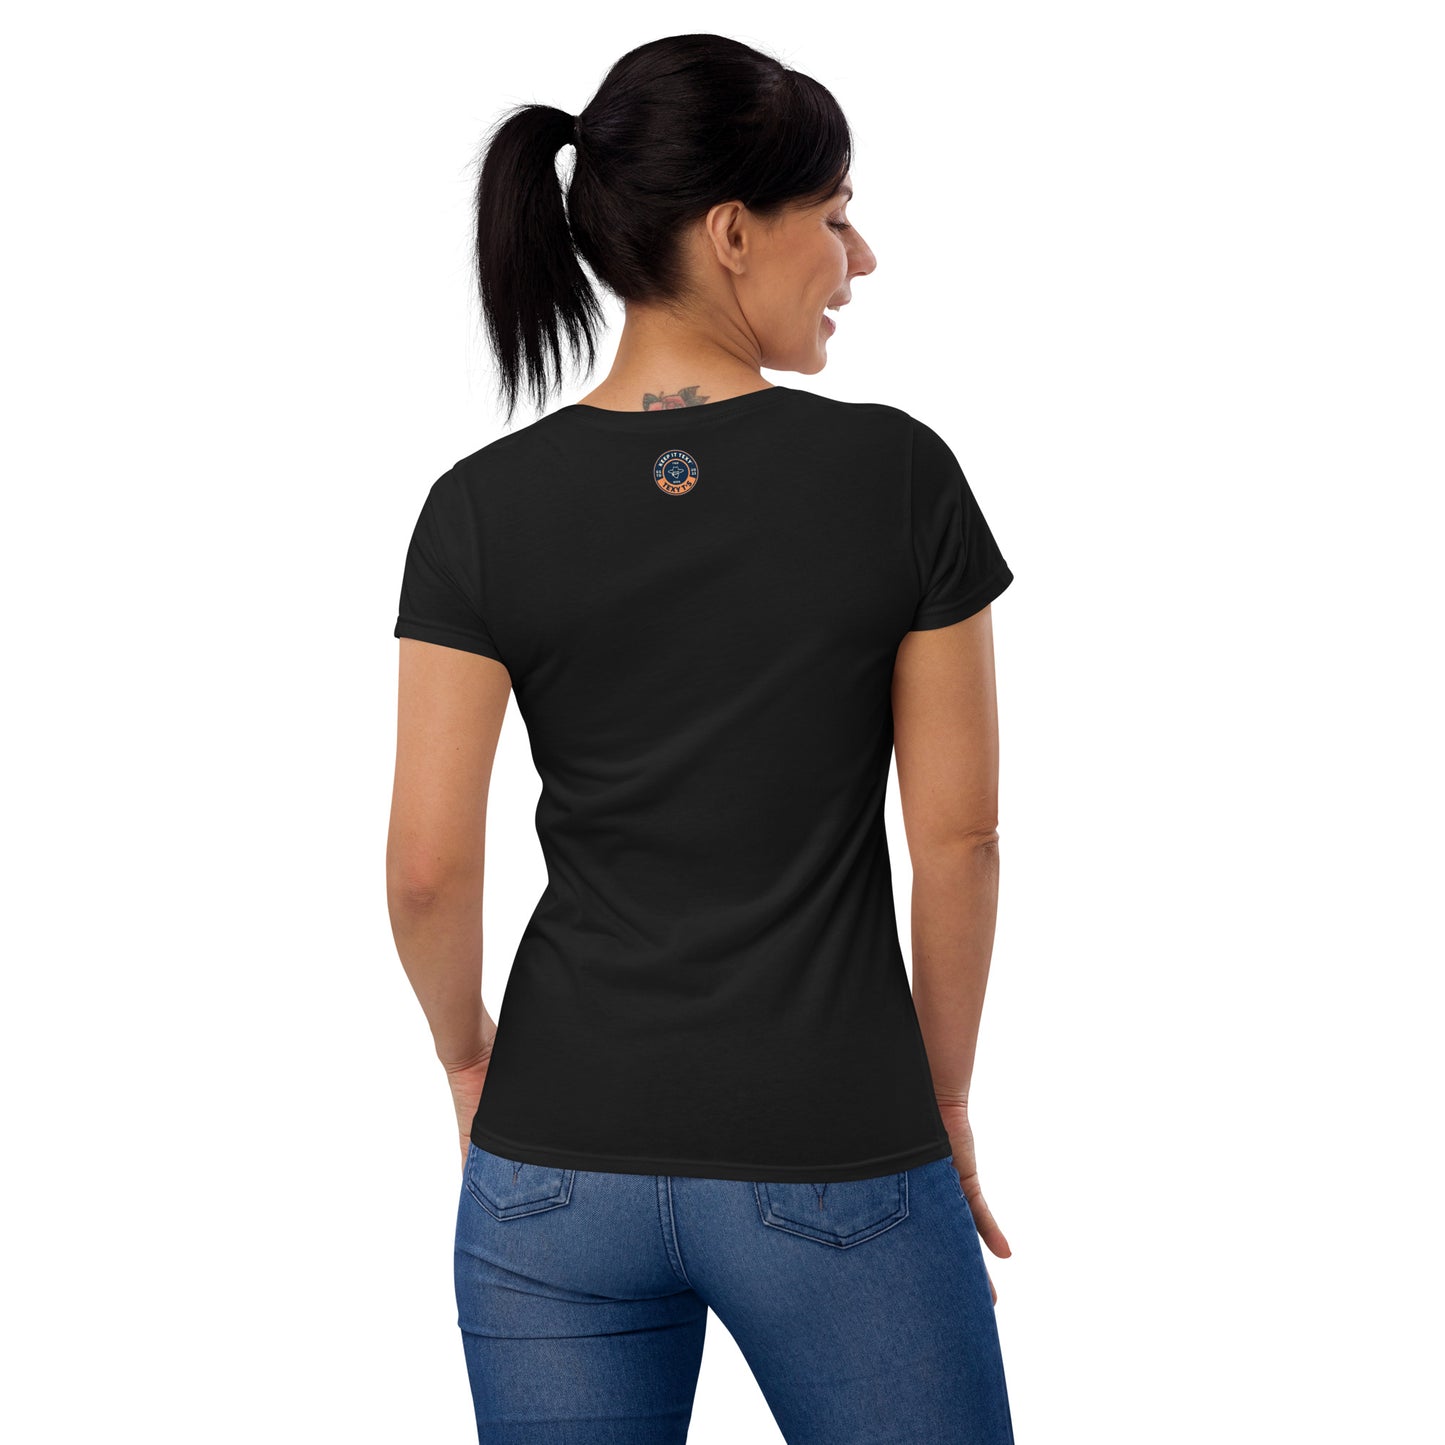 Women's Black Texy Lady Fitted T-Shirt